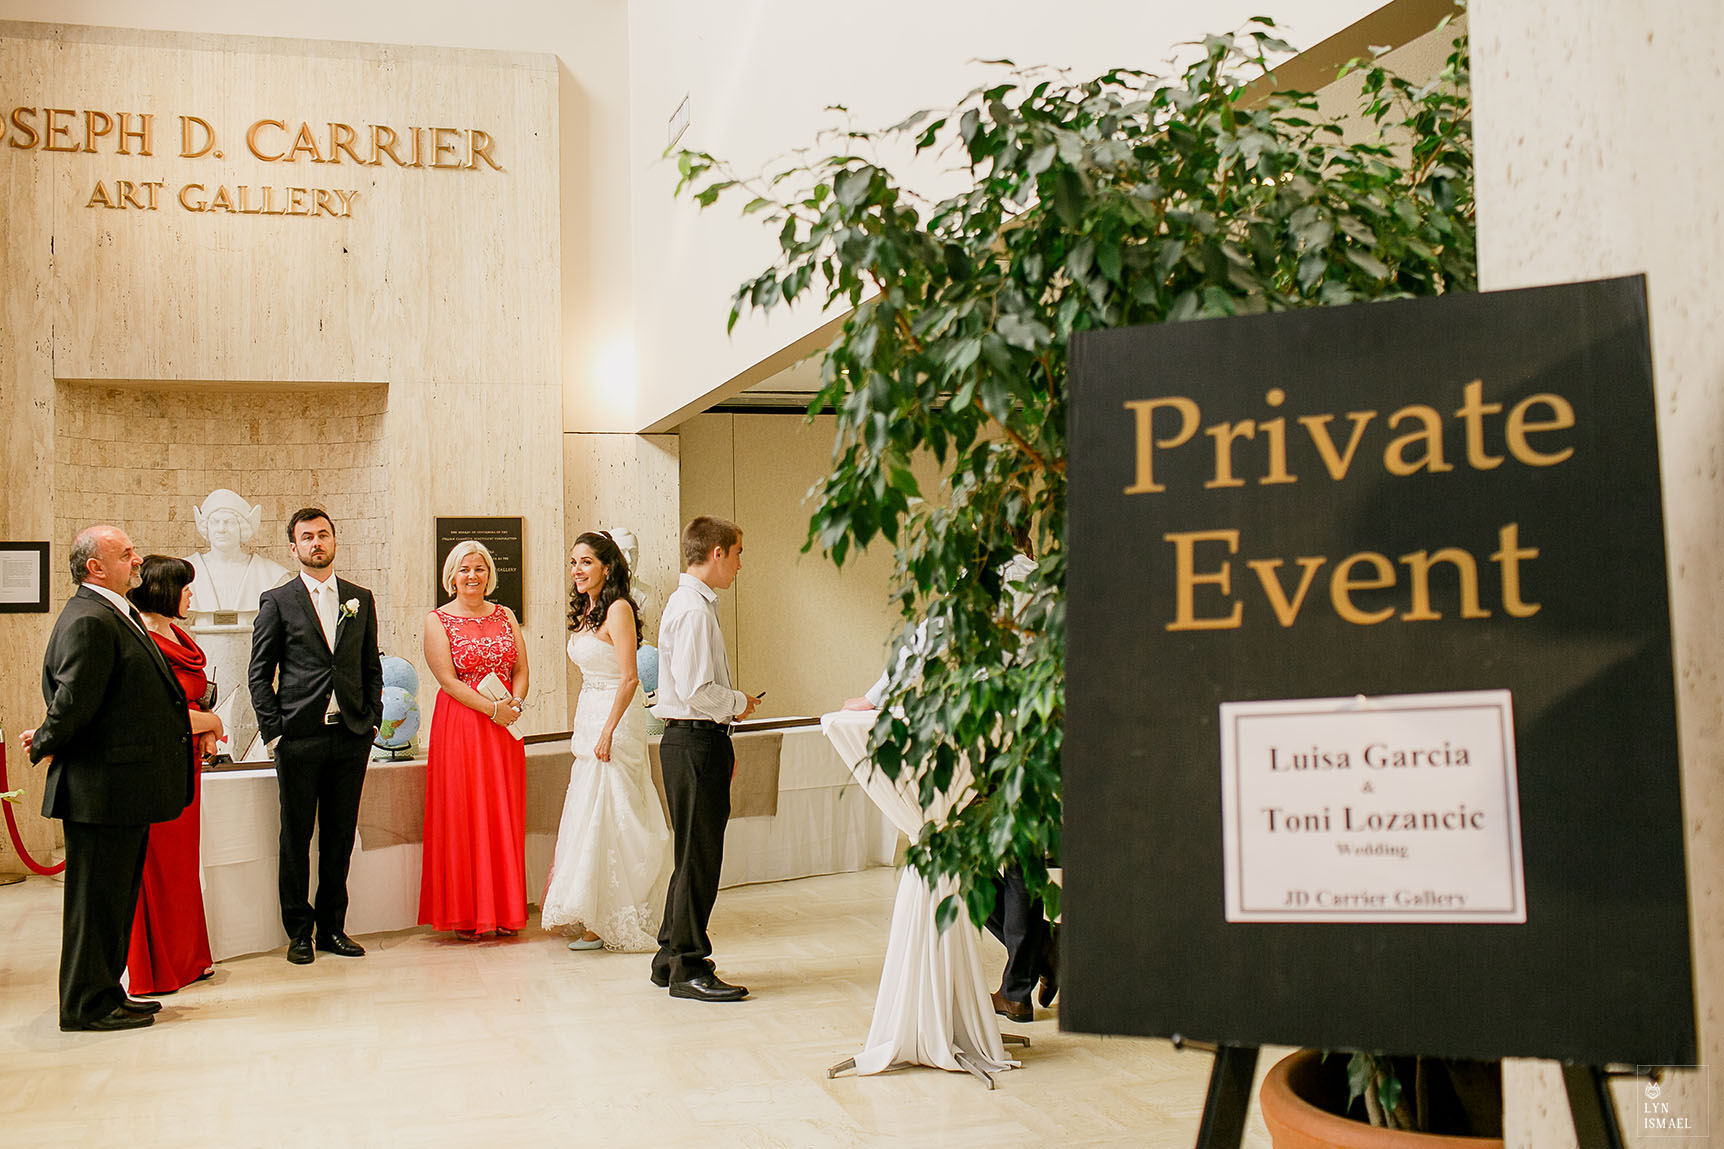 A private event at the Joseph D Carrier art gallery at the Columbus Event Centre